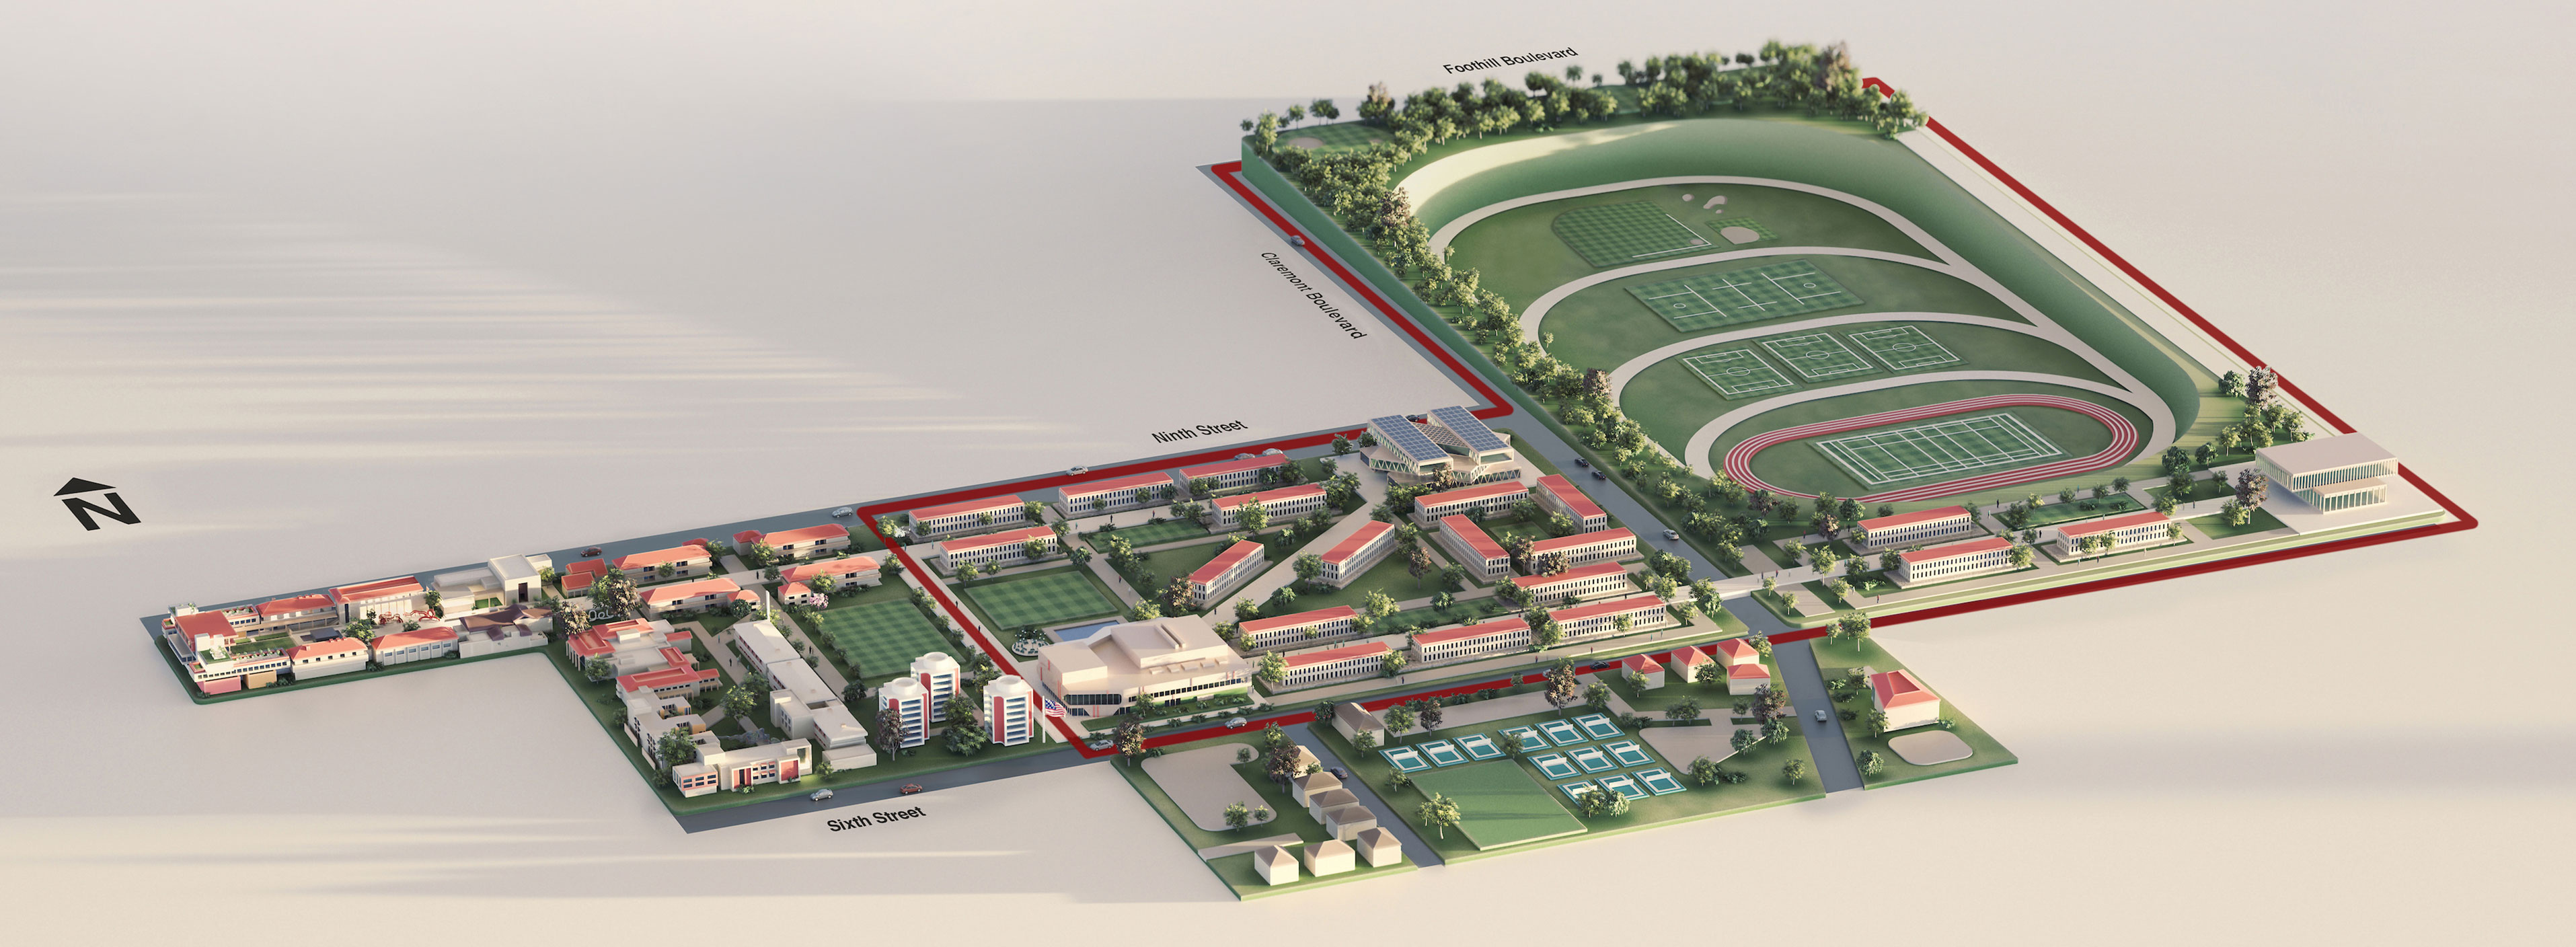 Rendering of the Roberts Campus